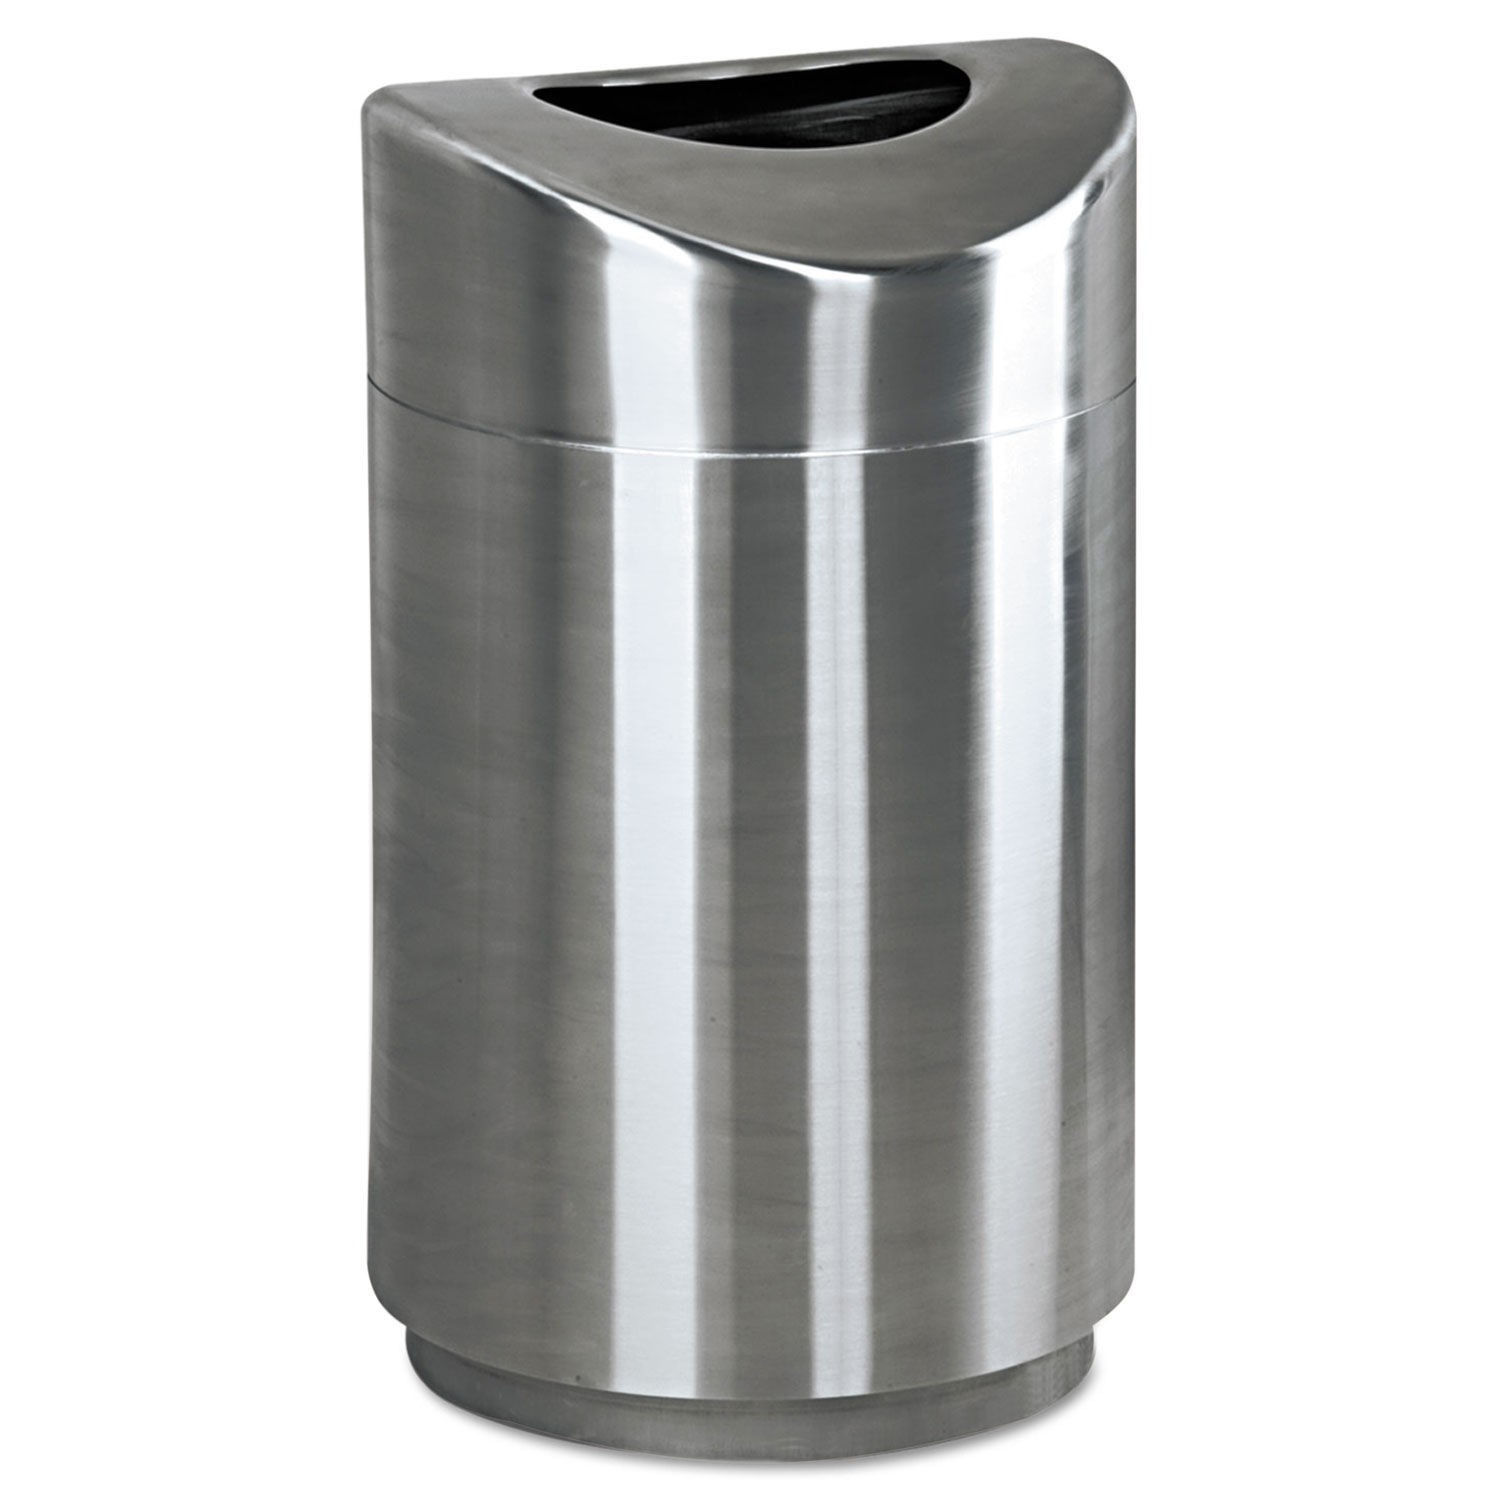  Eclipse Open Top Stainless Steel Waste Receptacle, 30 Gallon